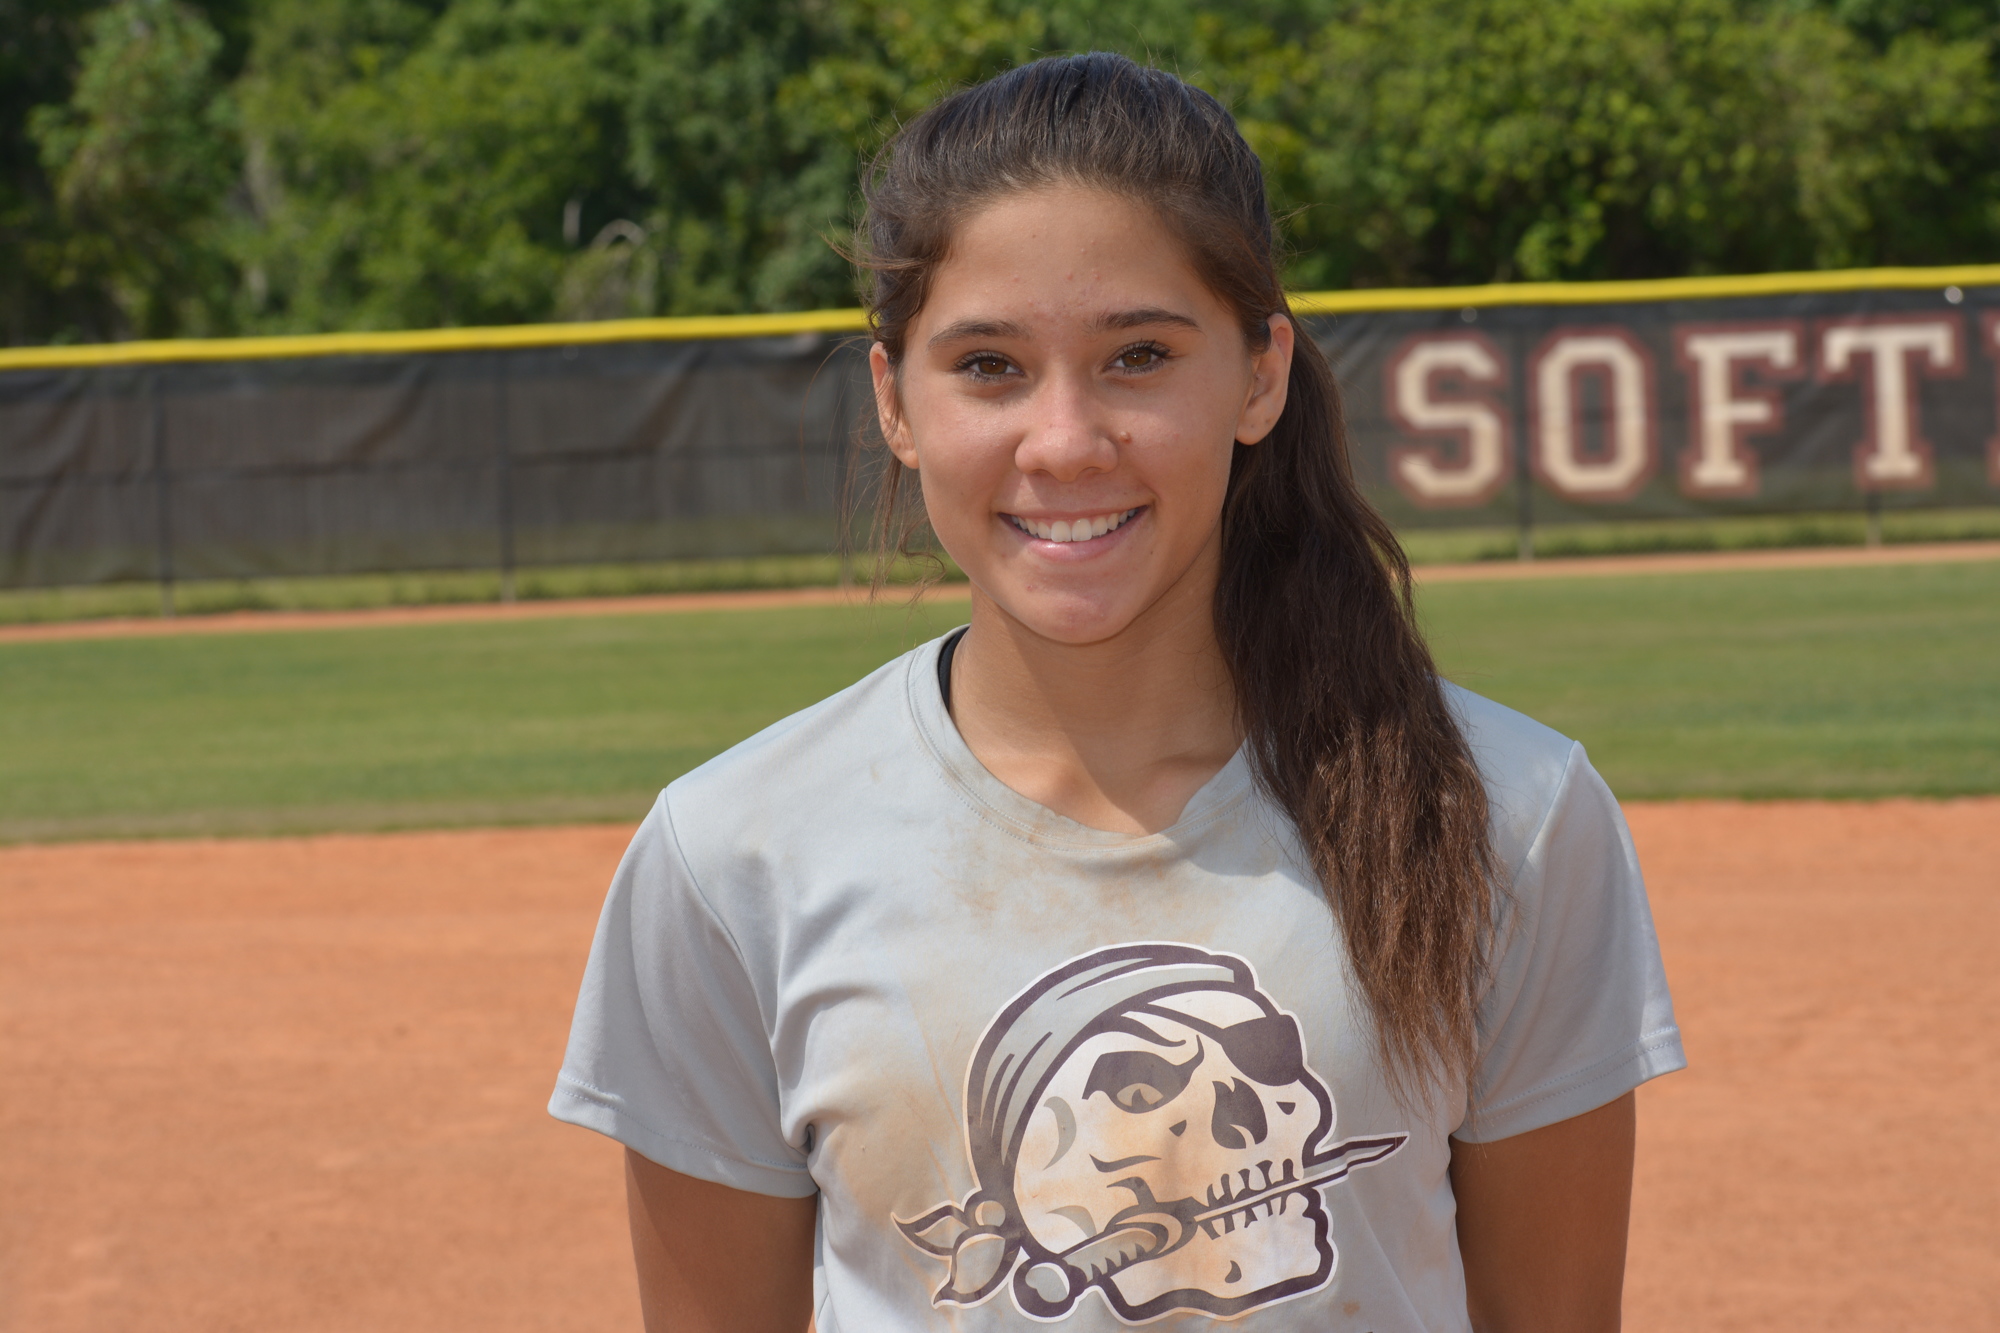 9. Braden River junior shortstop Jade Moy had a great year with her glove and her bat in 2019.